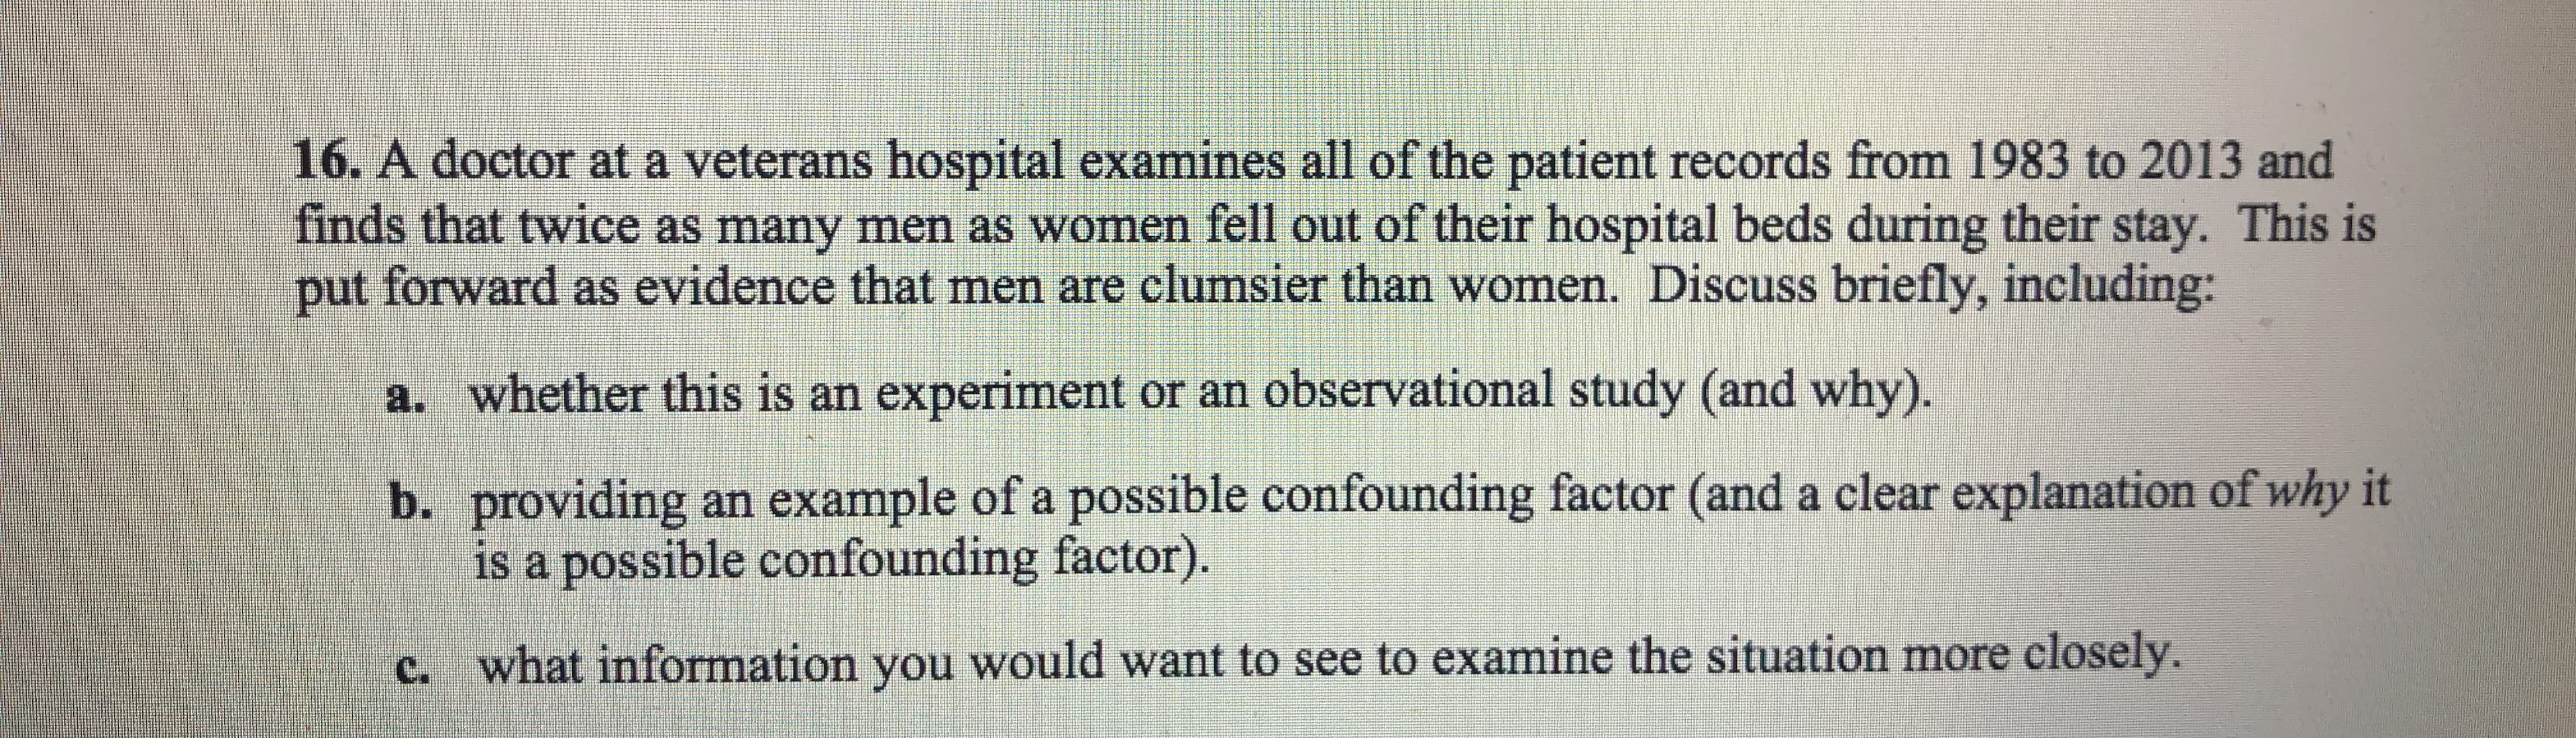 16·A doctor at a veterans hospital examines all of the patient records from 1983 to 2013 and
finds that twice as many men as women fell out of their hospital beds during their stay. This is
put forward as evidence that men are clumsier than women. Discuss briefly, including:
a.
whether this is an experiment or an observational study (and why)
b. providing an example of a possible confounding factor (and a clear explanation of why it
is a possible confounding factor)
what information you would want to see to examine the situation more closely.
c.
